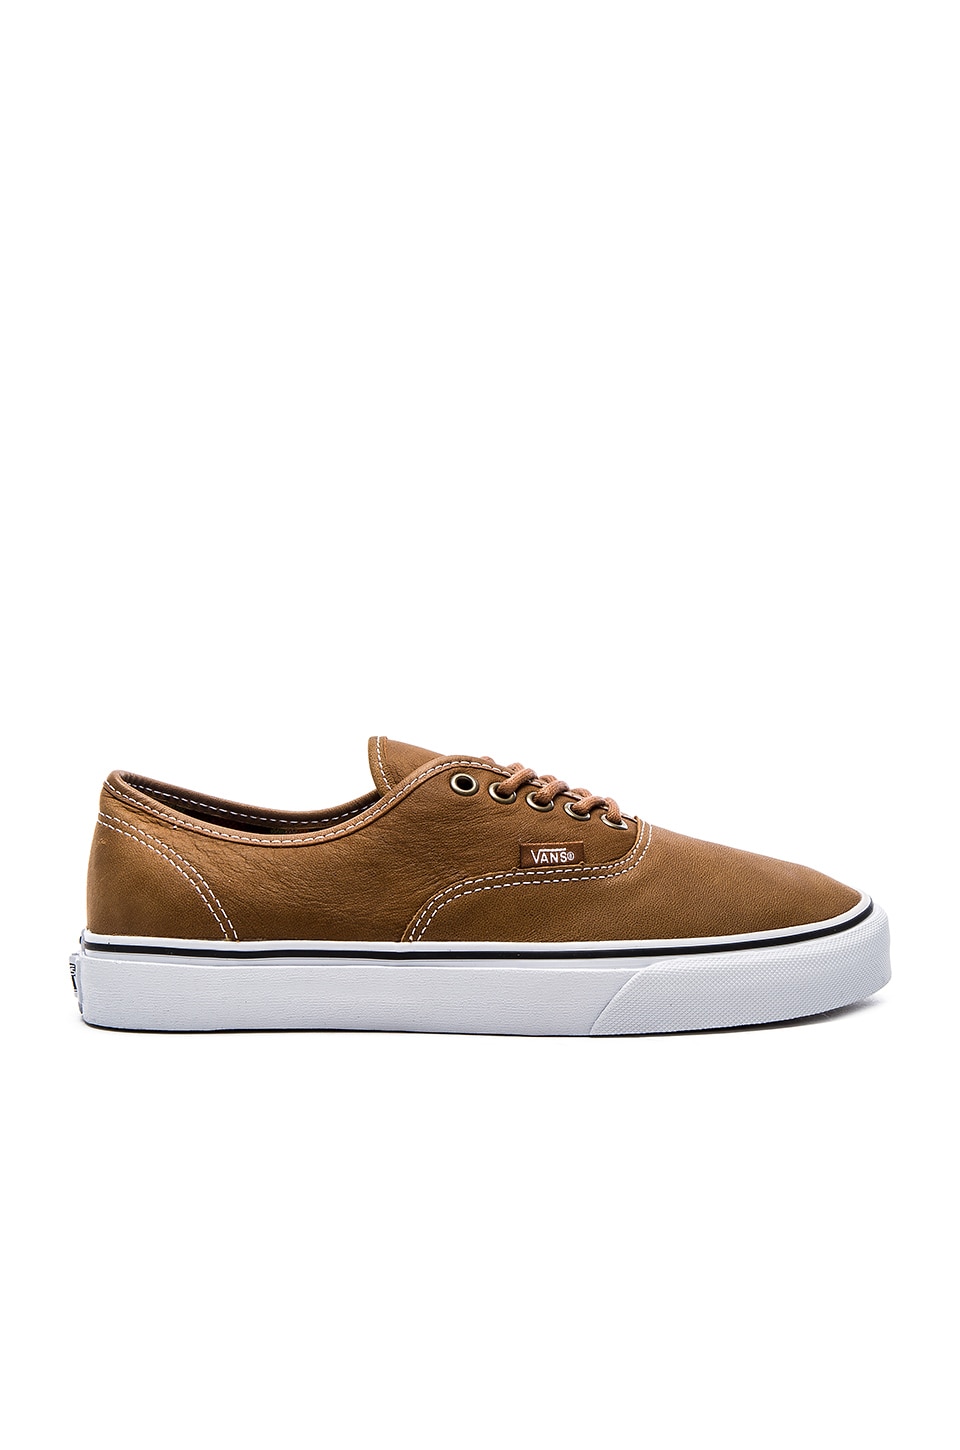 Vans Authentic in Brown Guate | REVOLVE